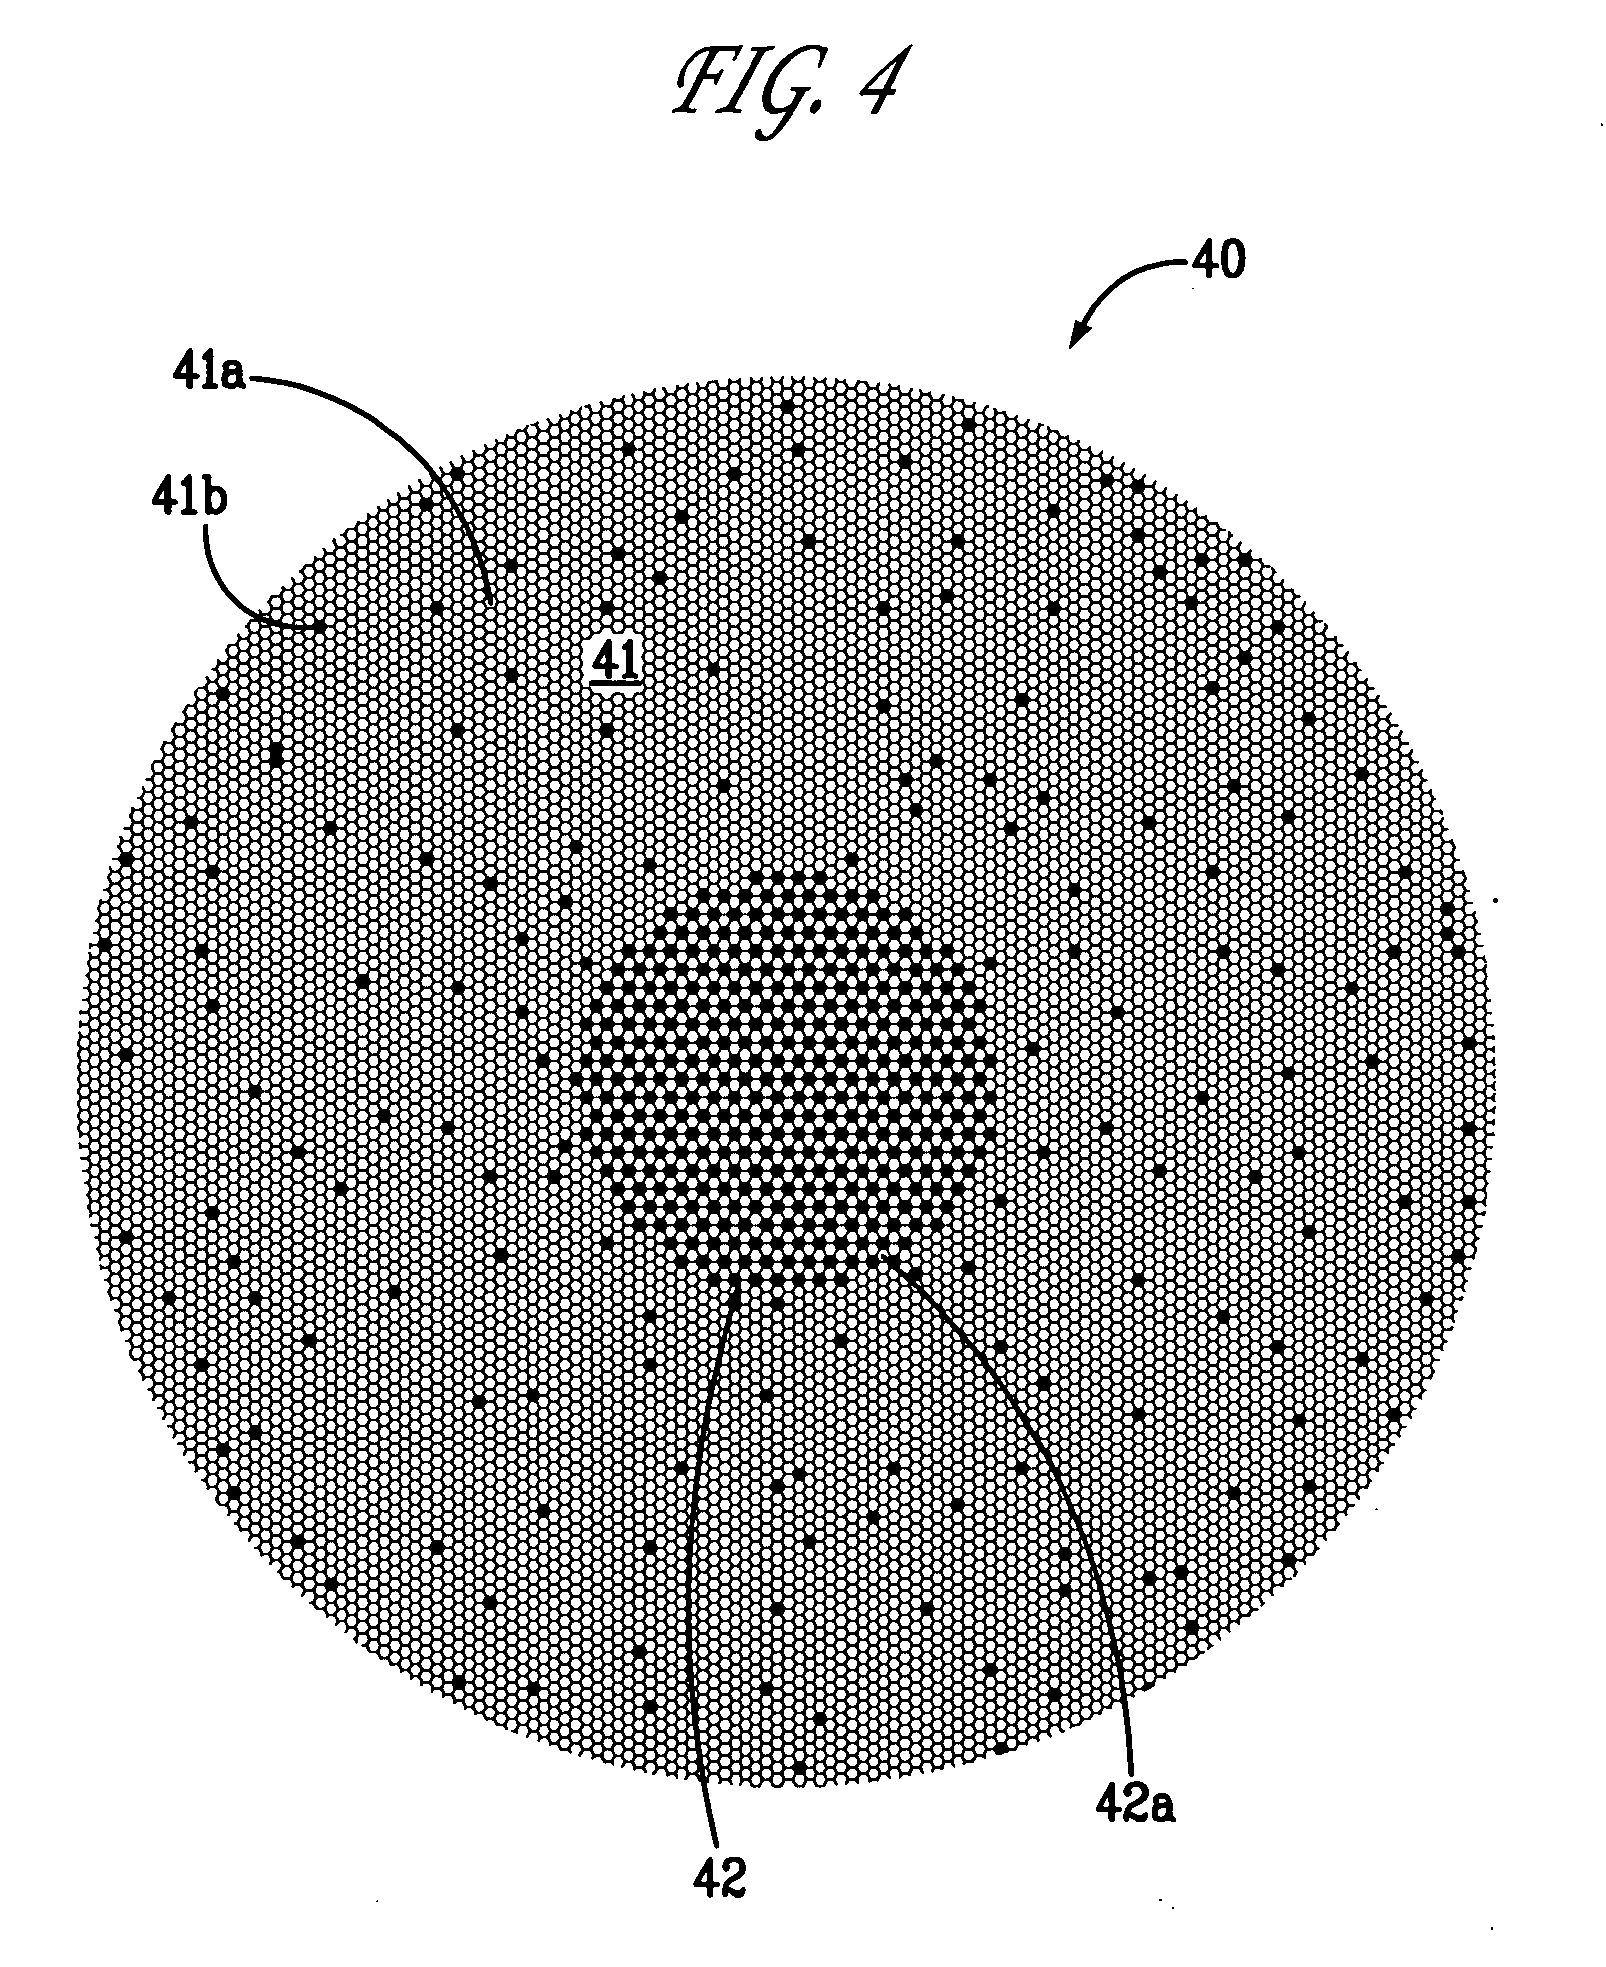 Preform for producing an optical fiber and method therefor